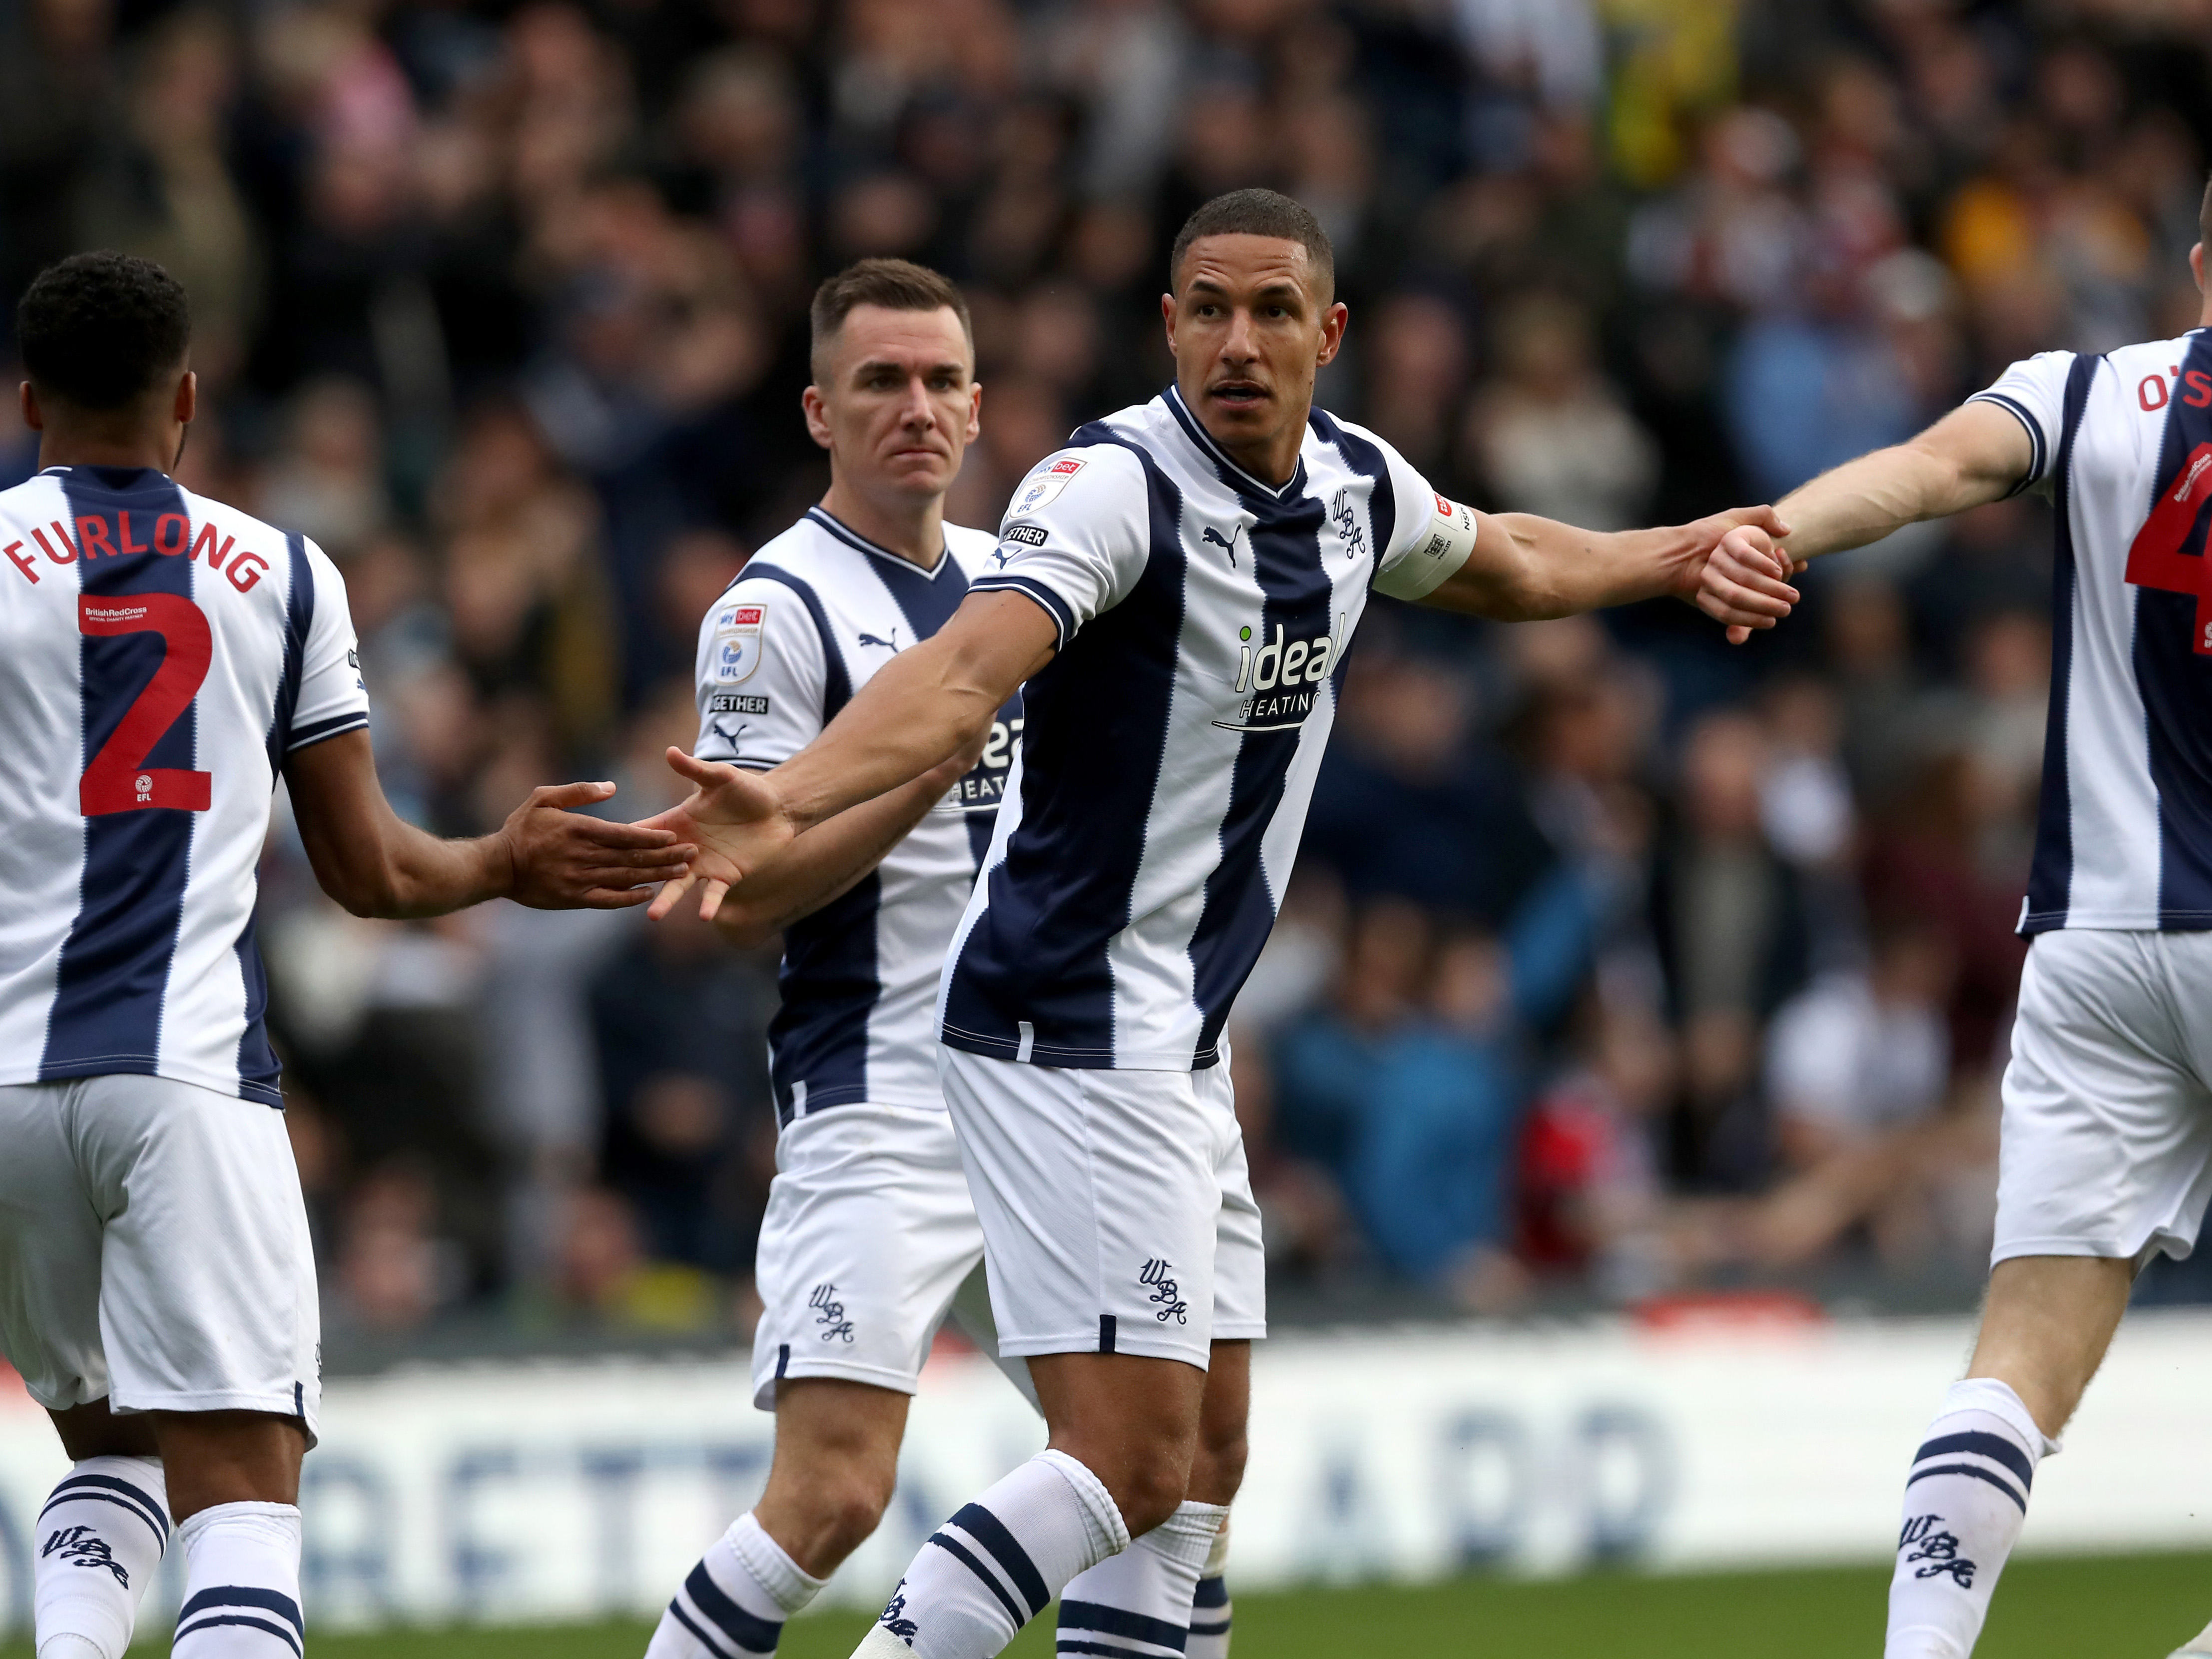 Hull City 0-2 West Brom: Steve Bruce finally claims first Baggies